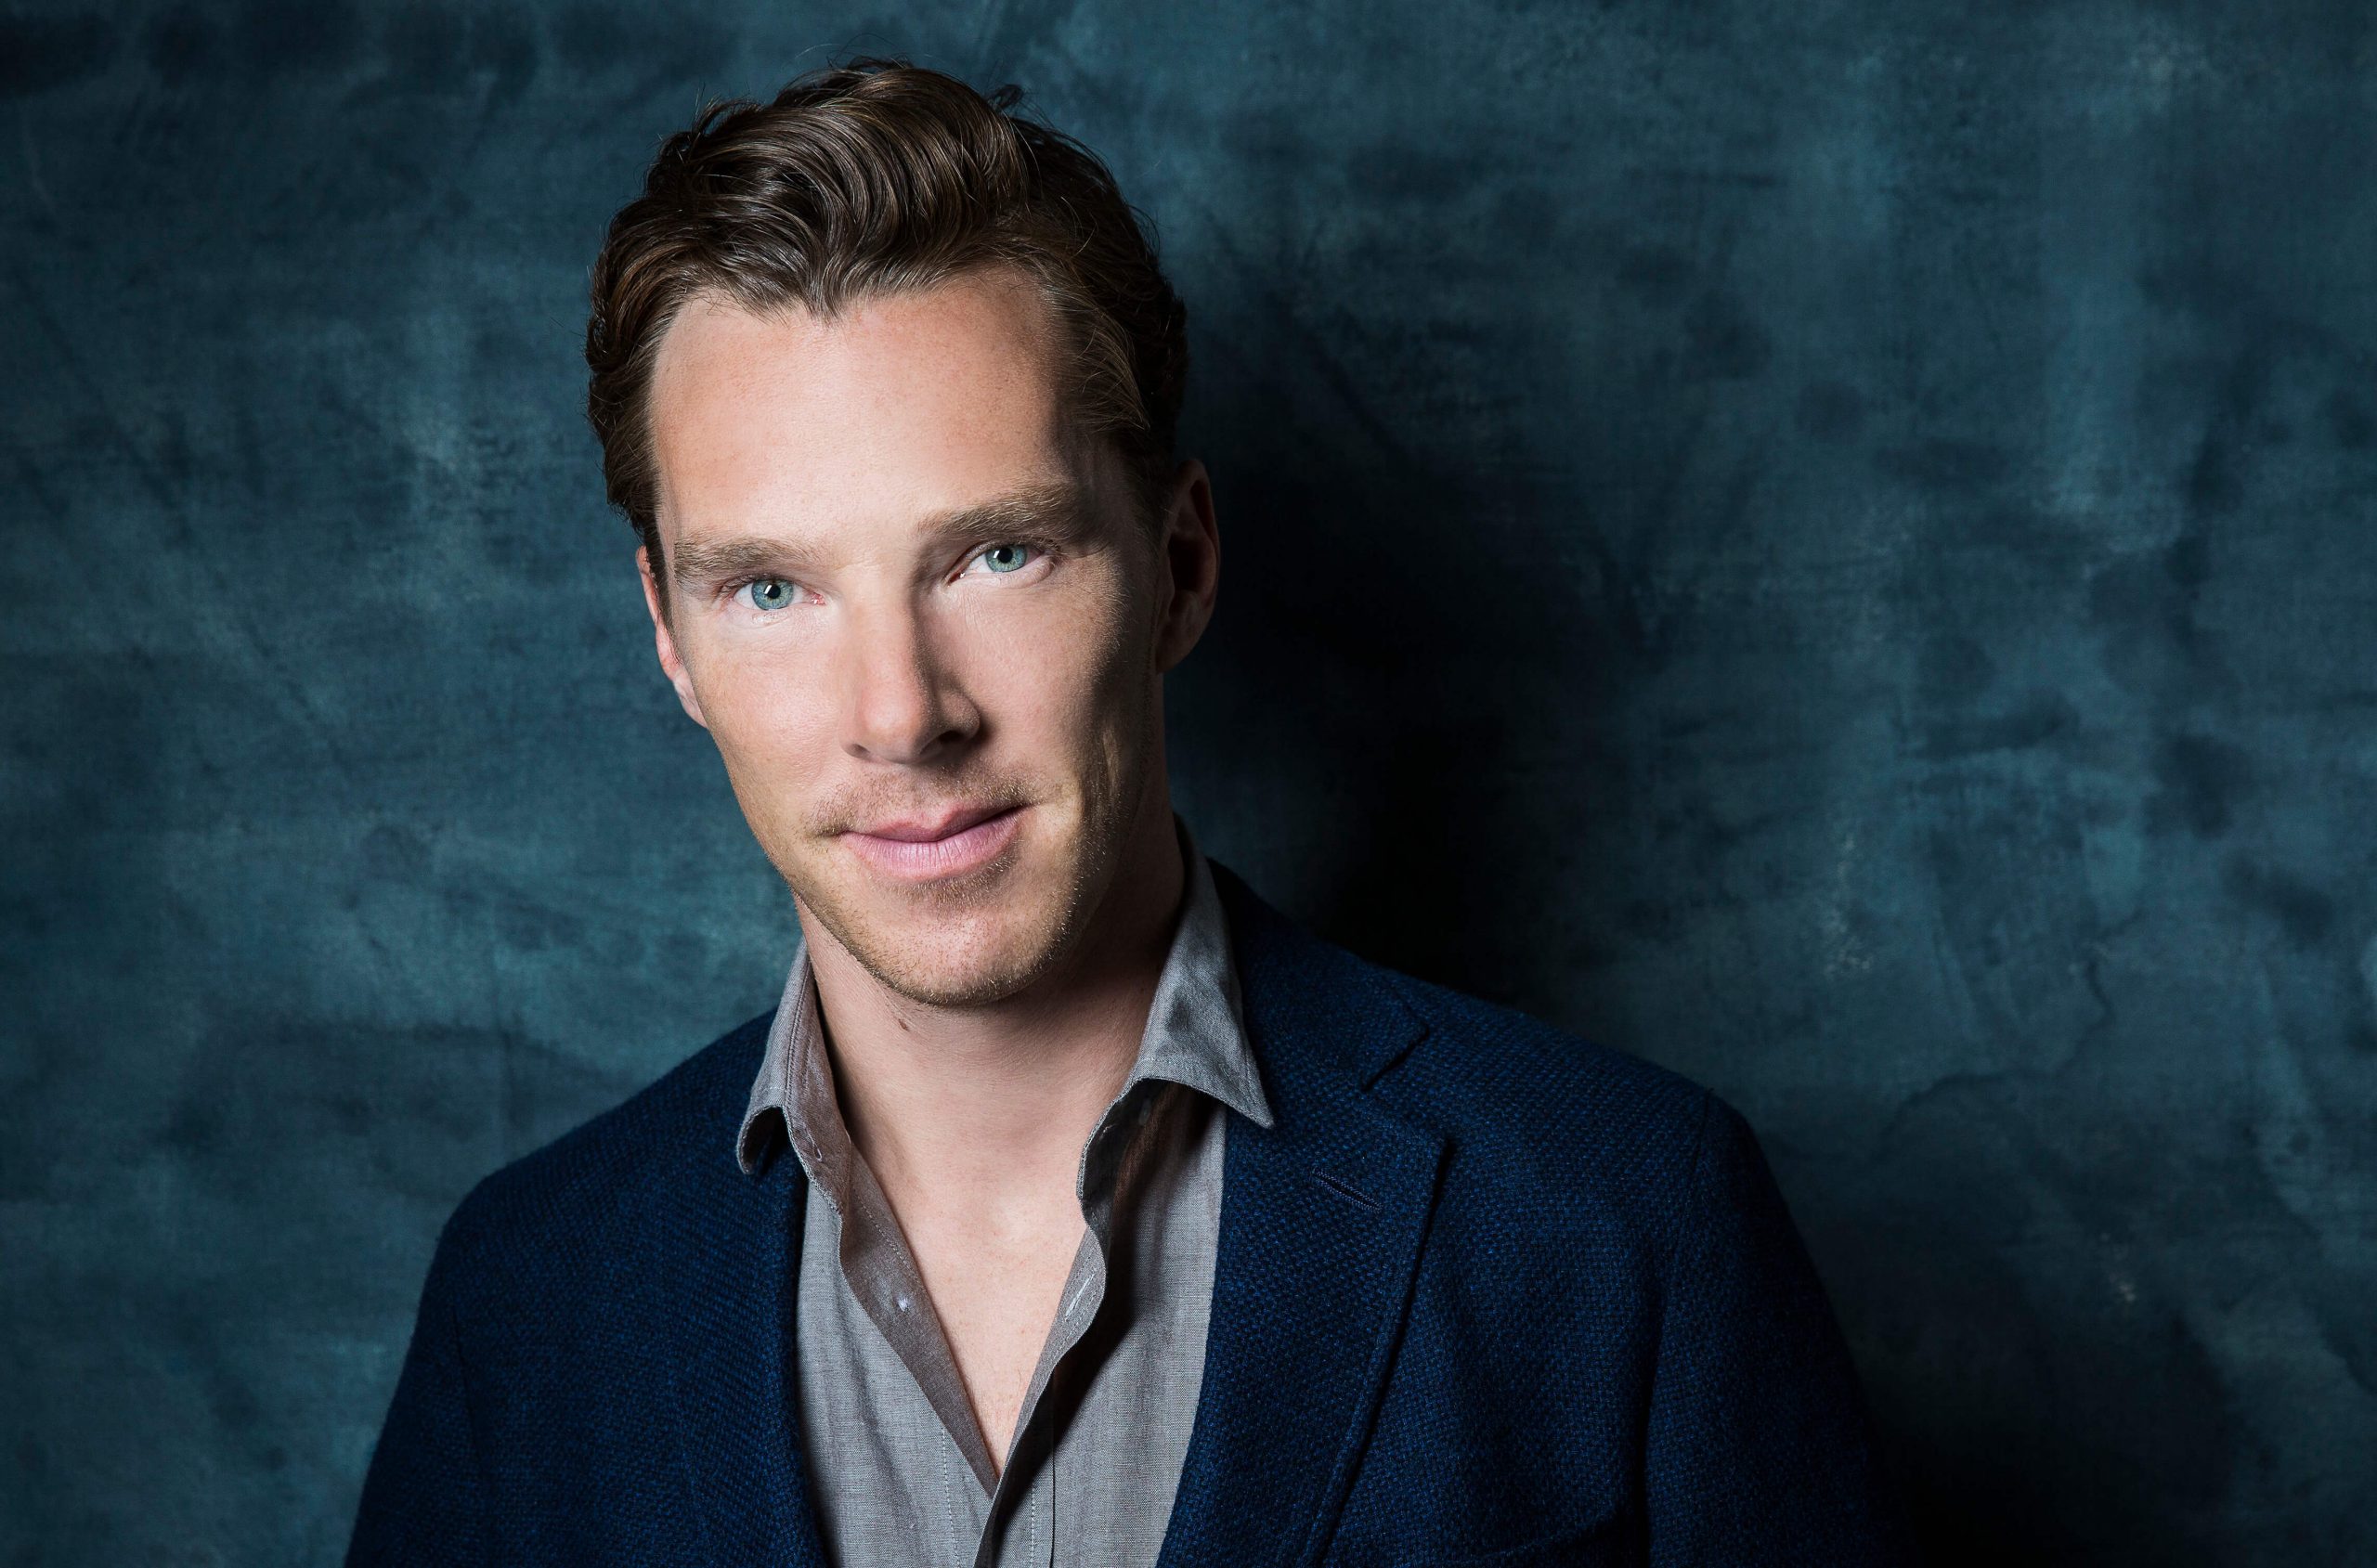 TORONTO, CANADA - SEPTEMBER 09: Actor Benedict Cumberbatch is photographed for Los Angeles Times on September 9, 2014 in Toronto, Ontario. PUBLISHED IMAGE. CREDIT MUST READ: Jay L. Clendenin/Los Angeles Times/Contour by Getty Images. (Photo by Jay L. Clendenin/Contour by Getty Images)